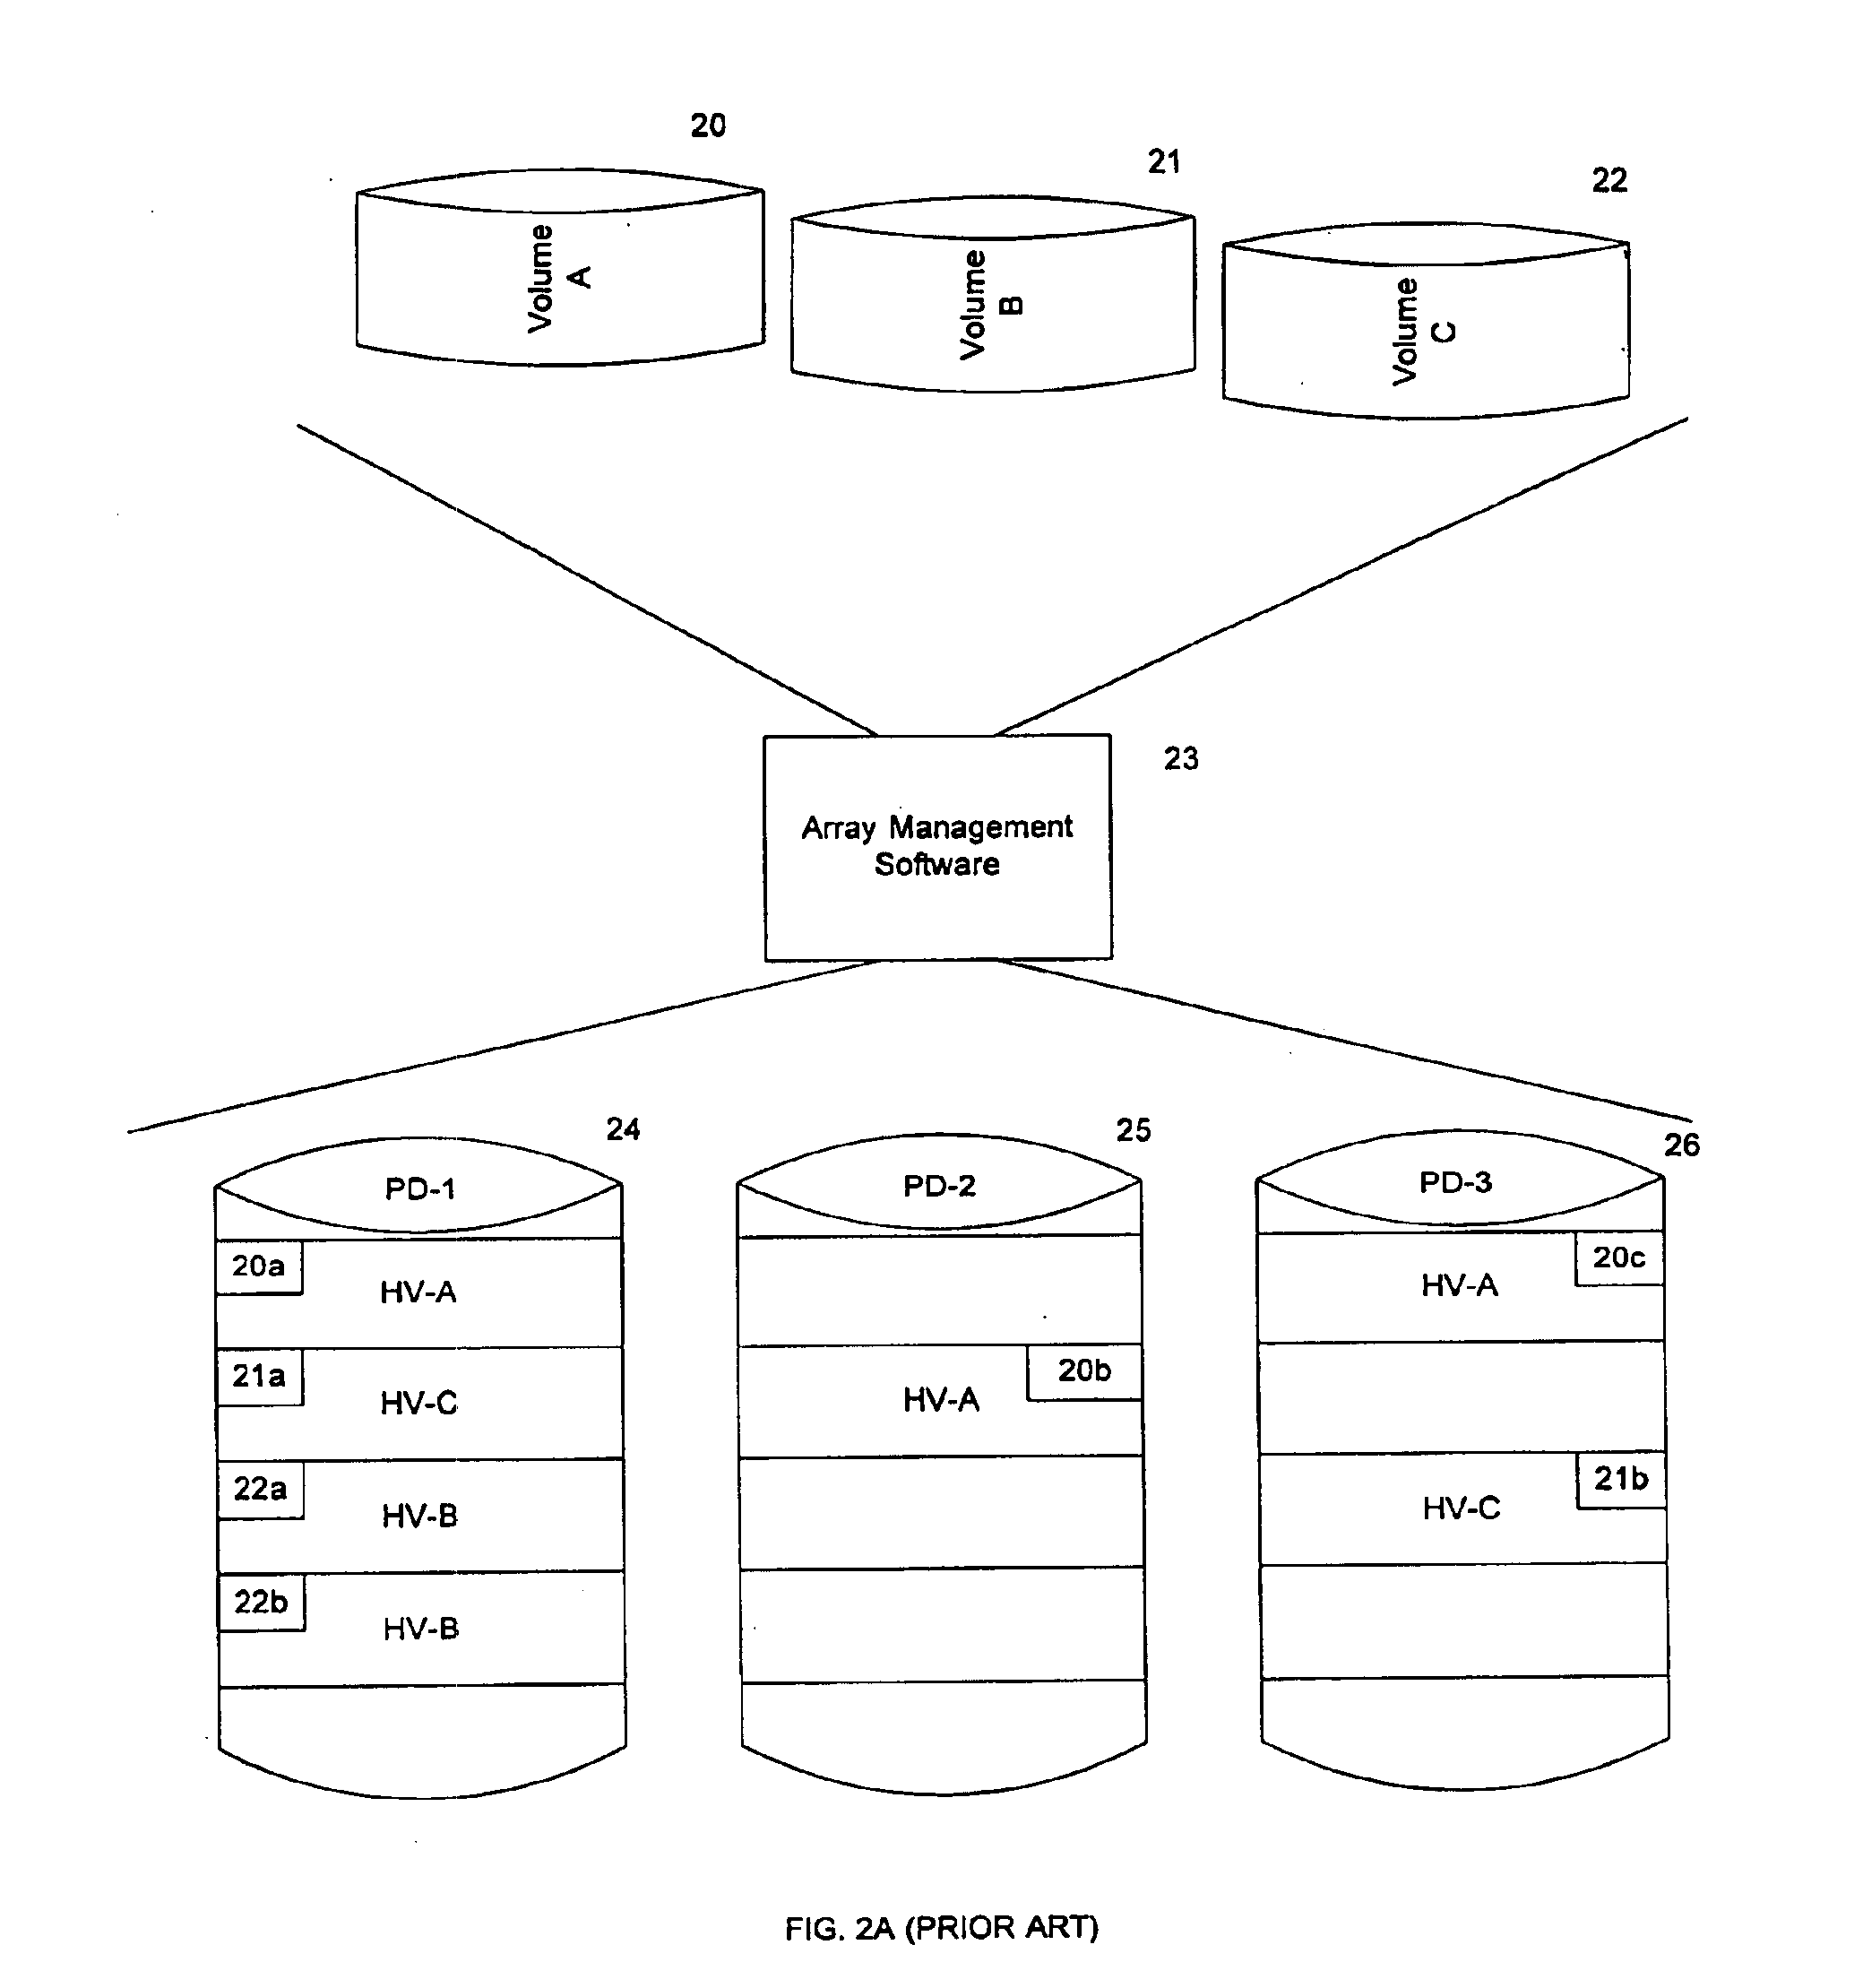 Method and apparatus for controlling read and write accesses to a logical entity